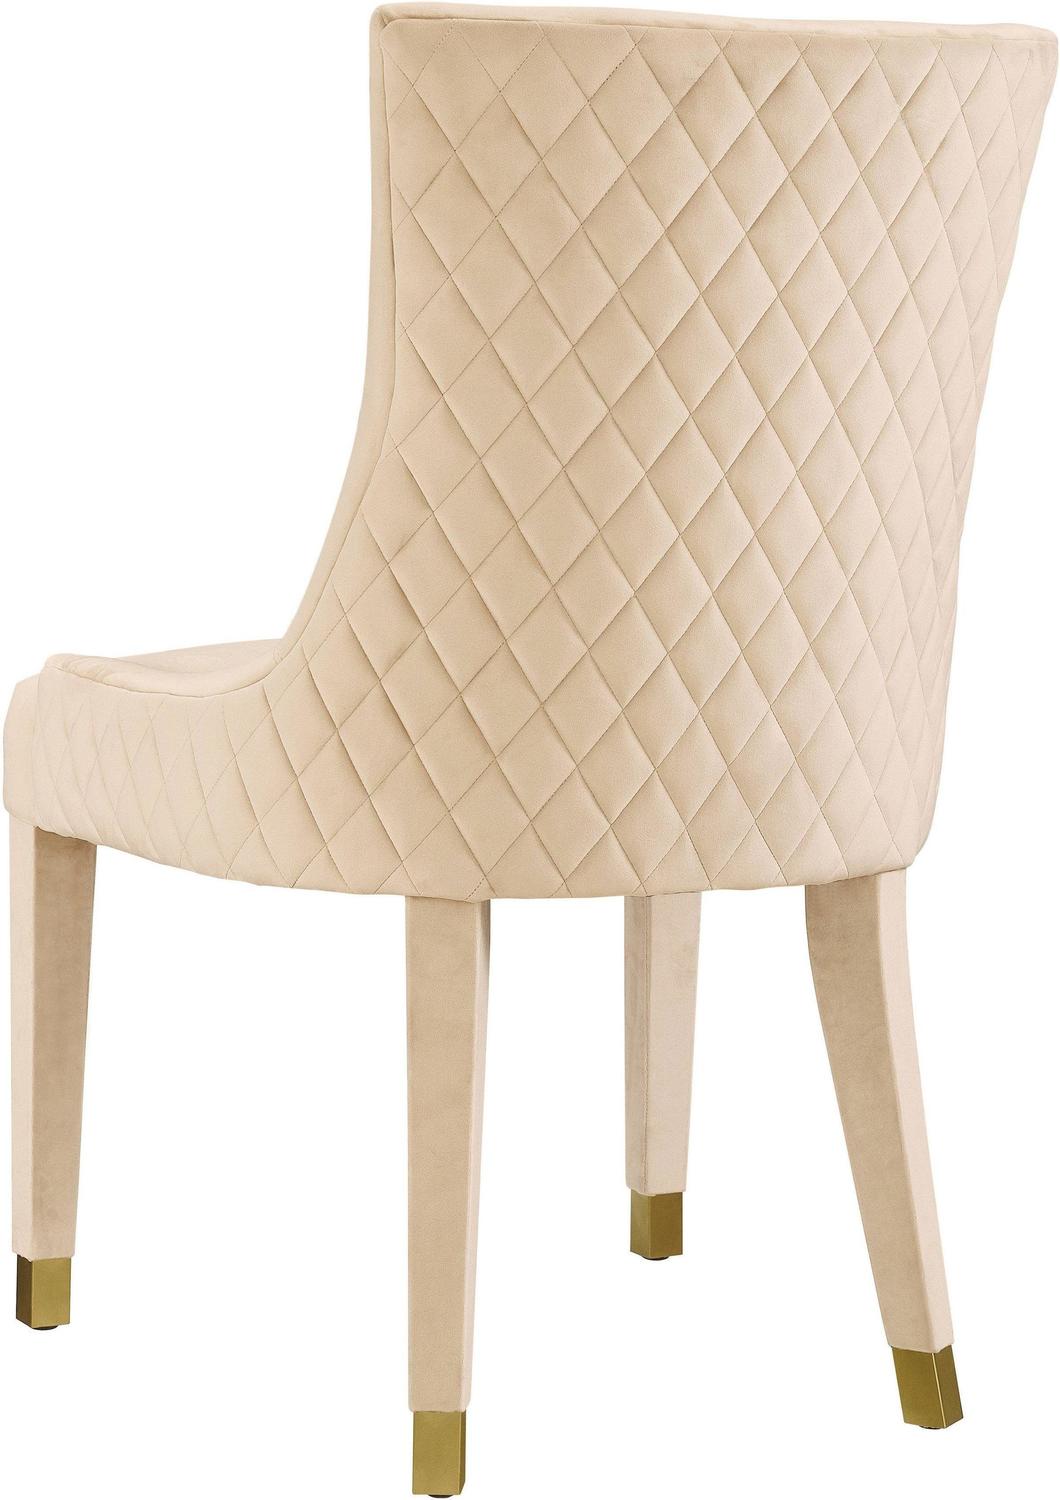 best wooden dining chairs Tov Furniture Dining Chairs Cream